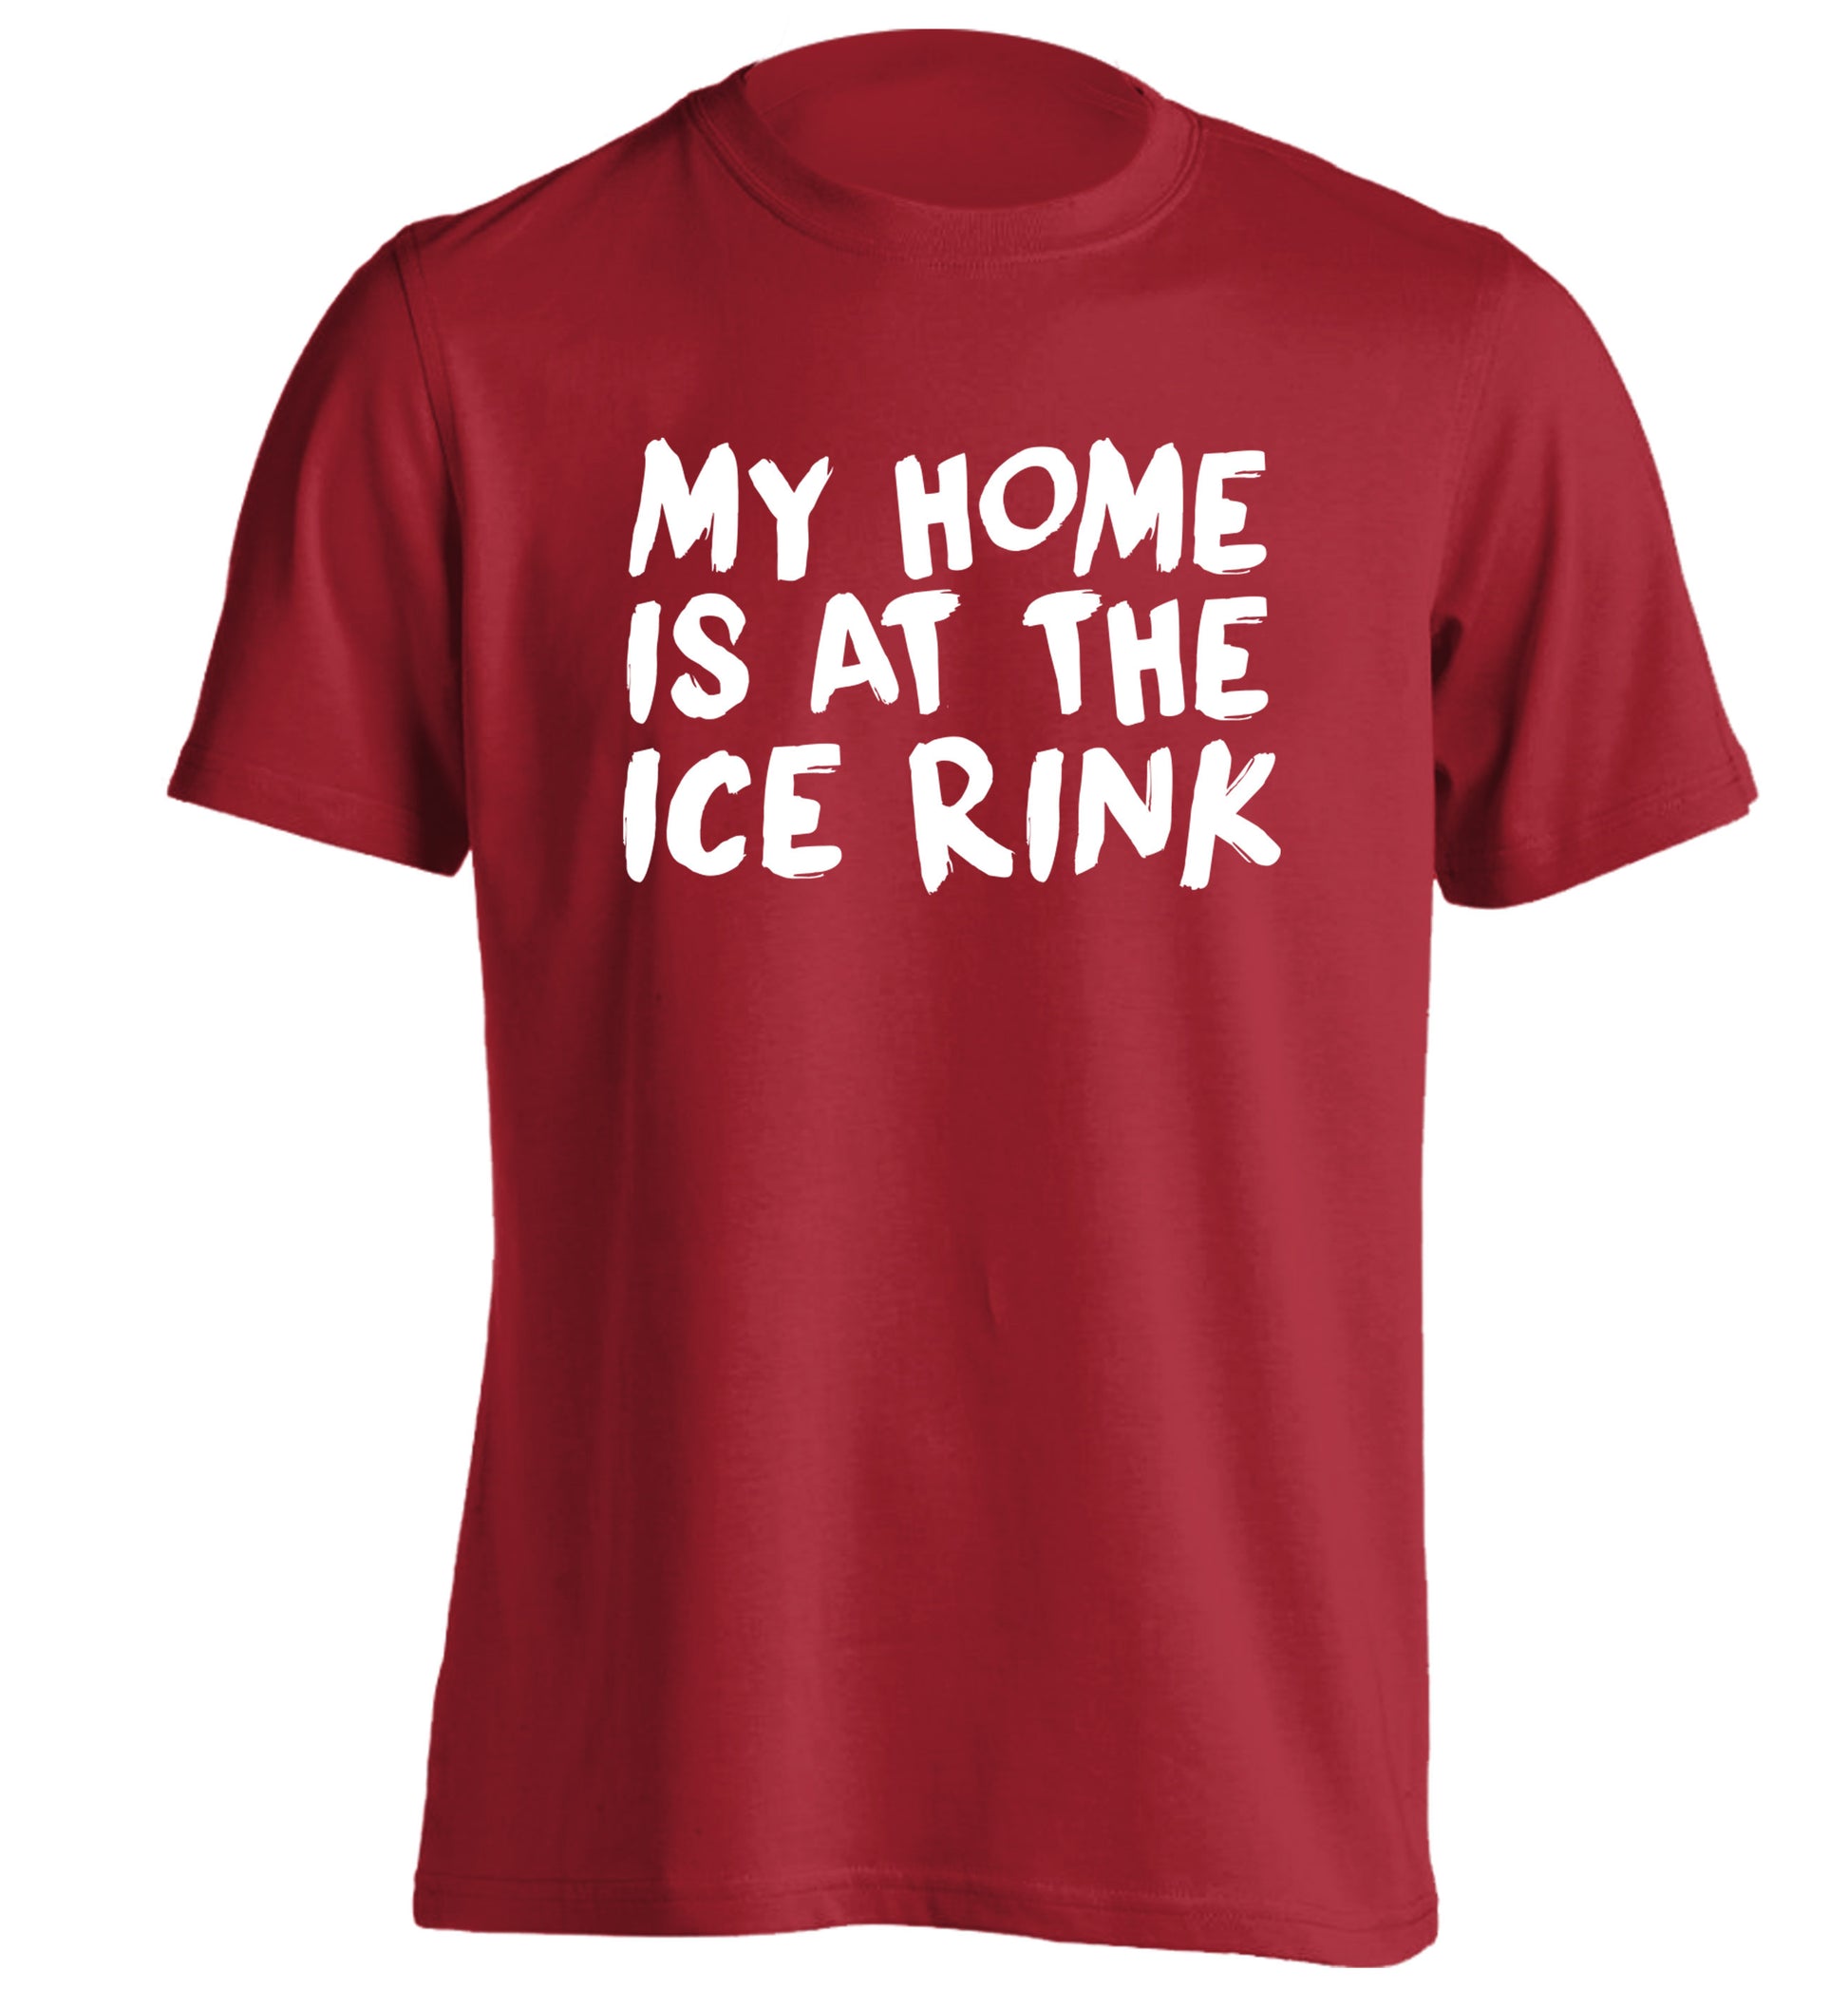 My home is at the ice rink adults unisex red Tshirt 2XL